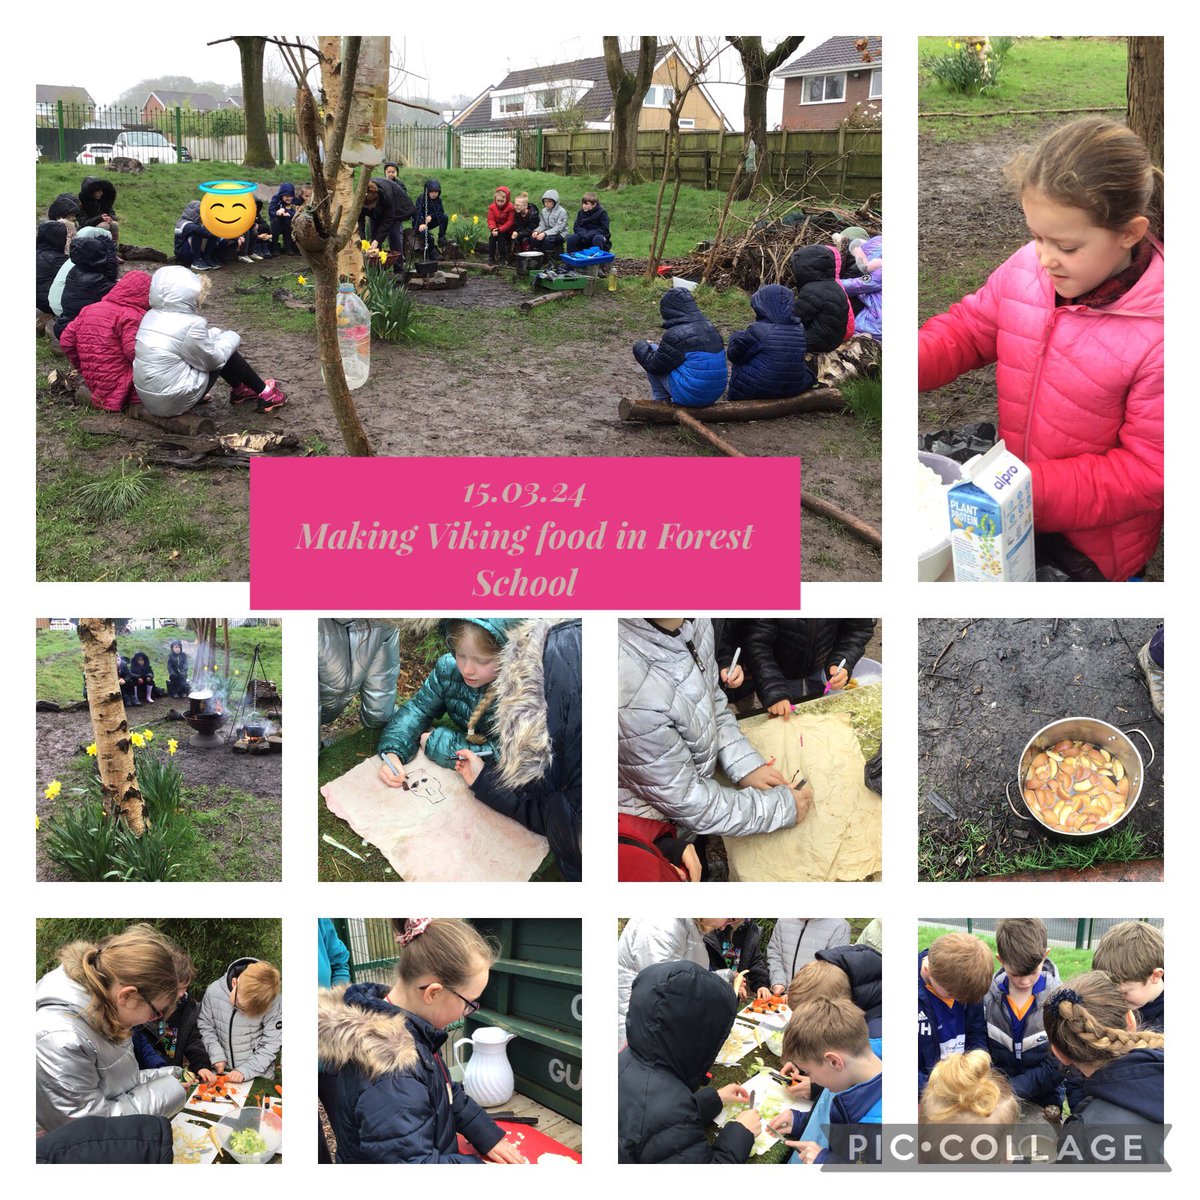 Year 4 are loving their time in Forest School!